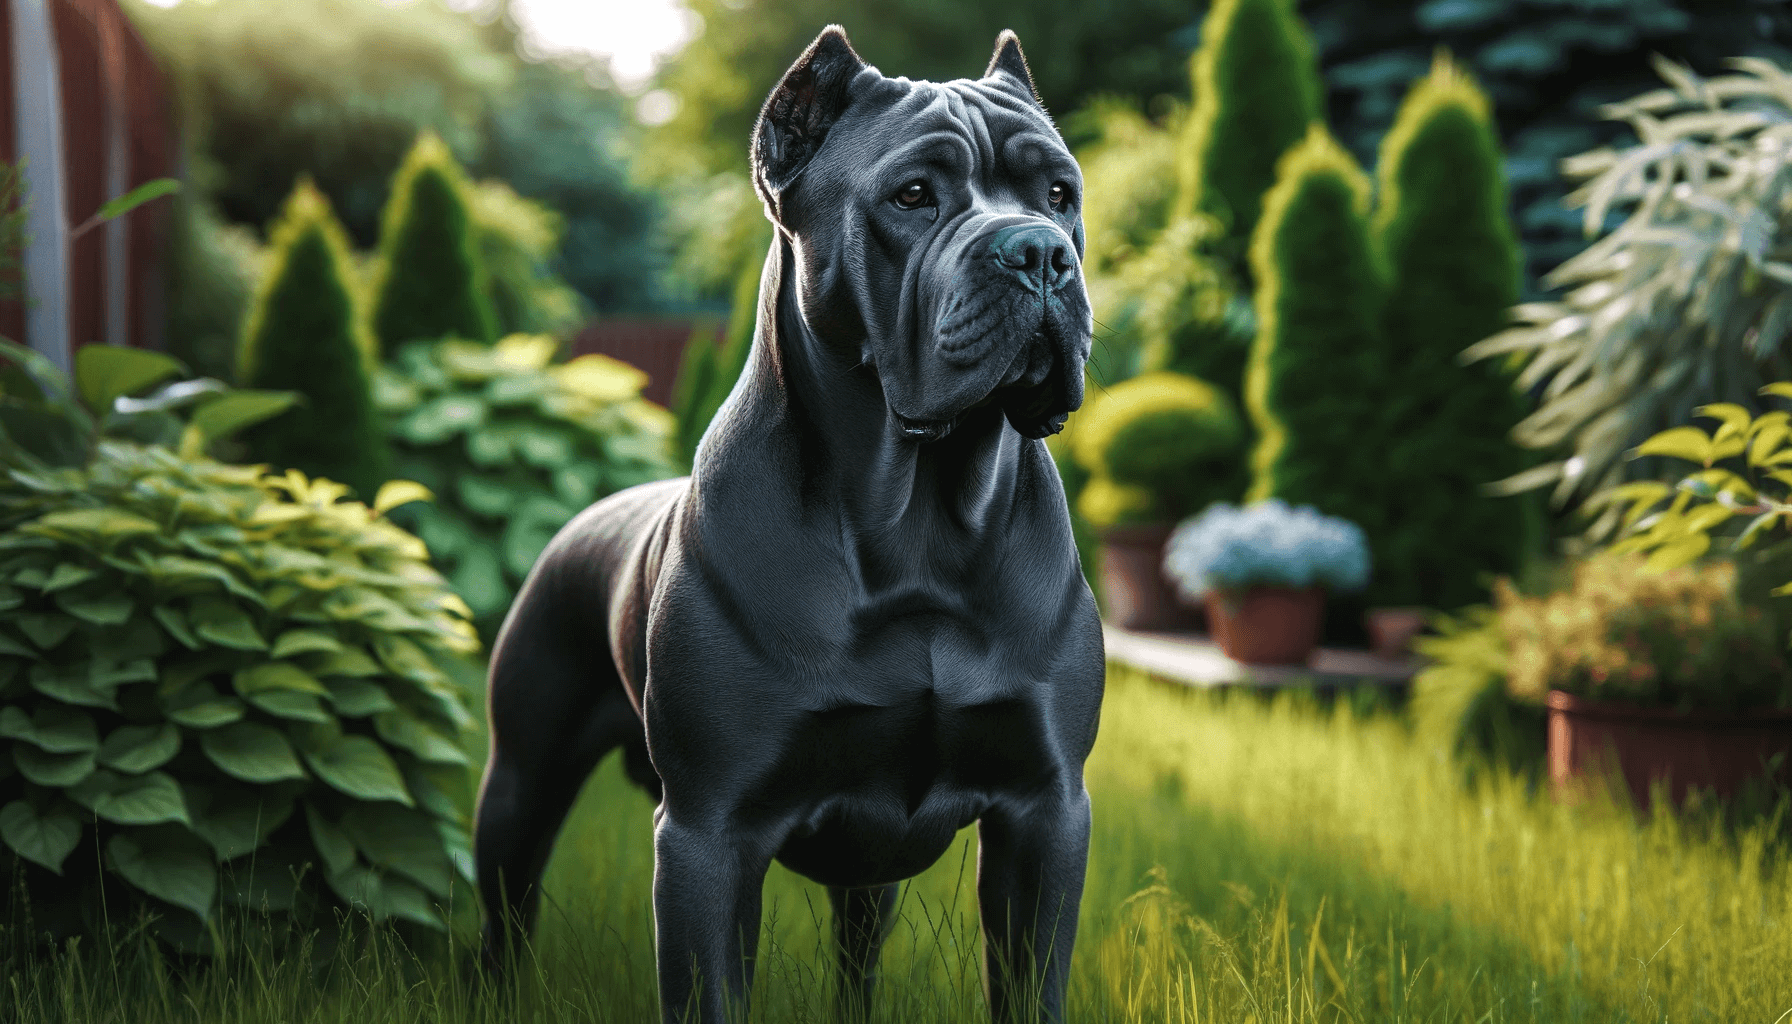 Blue Cane Corsos Standing in an Outdoor Setting Filled with Lush Greenery